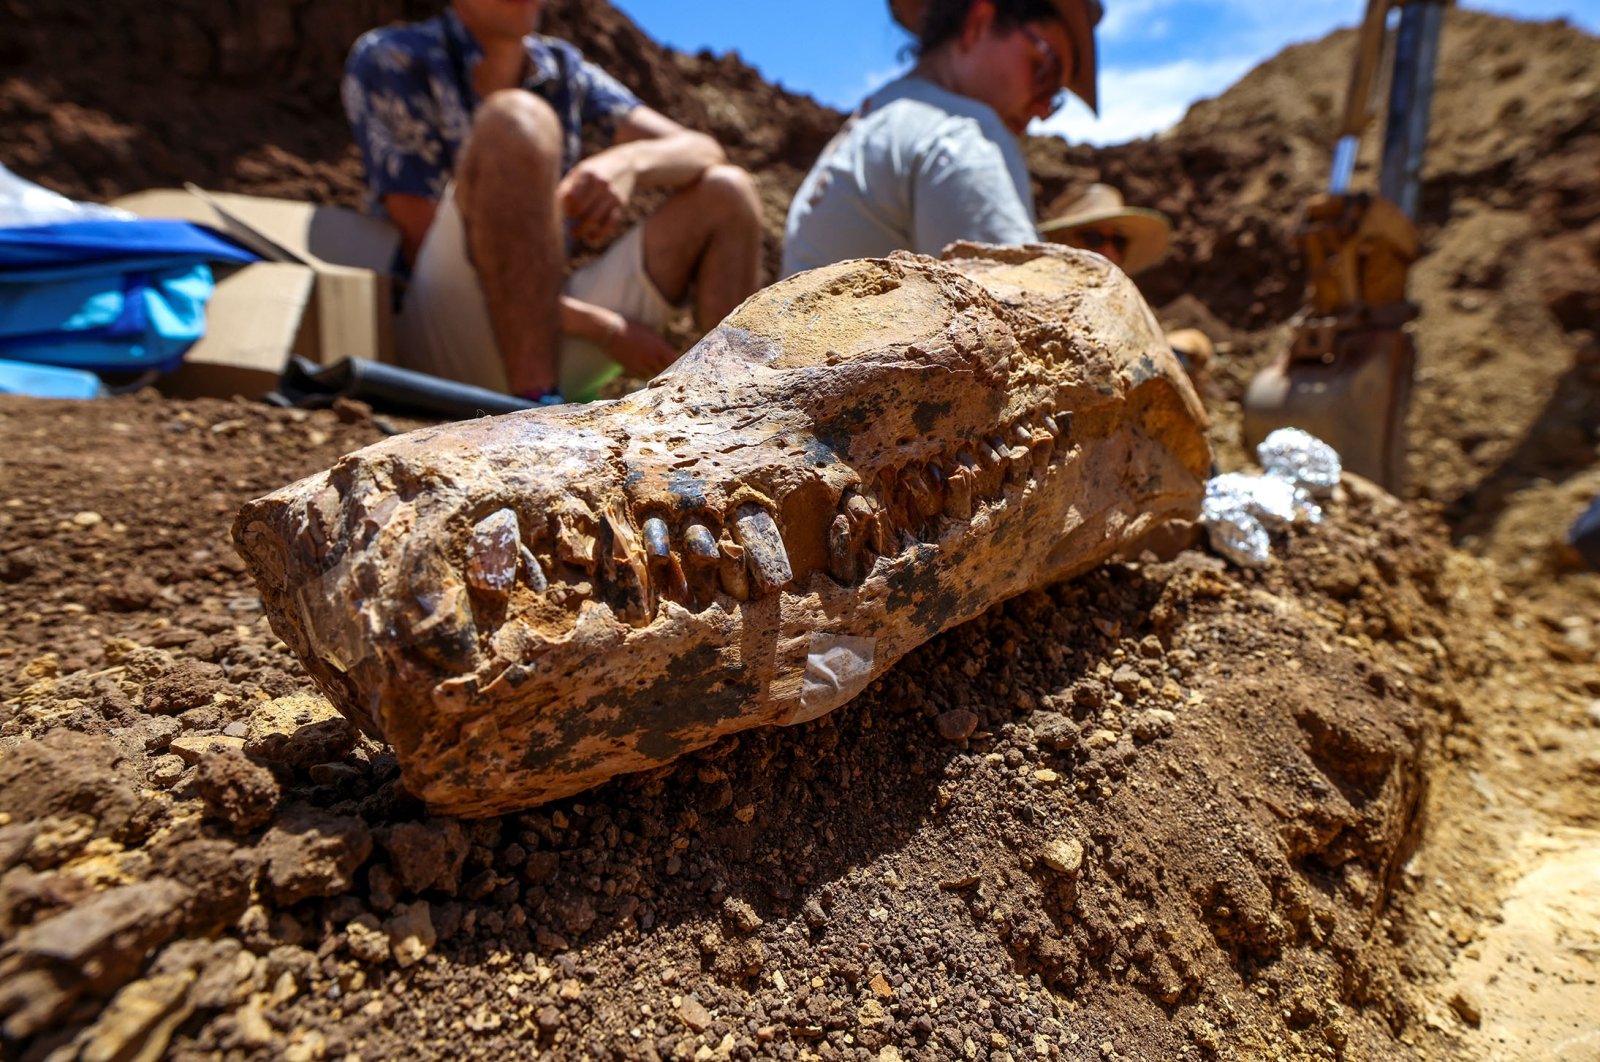 A 100-million-year-old long-necked marine reptile fossil, in Mckinlay, Queensland, Australia, Oct. 2, 2022. (Reuters Photo)